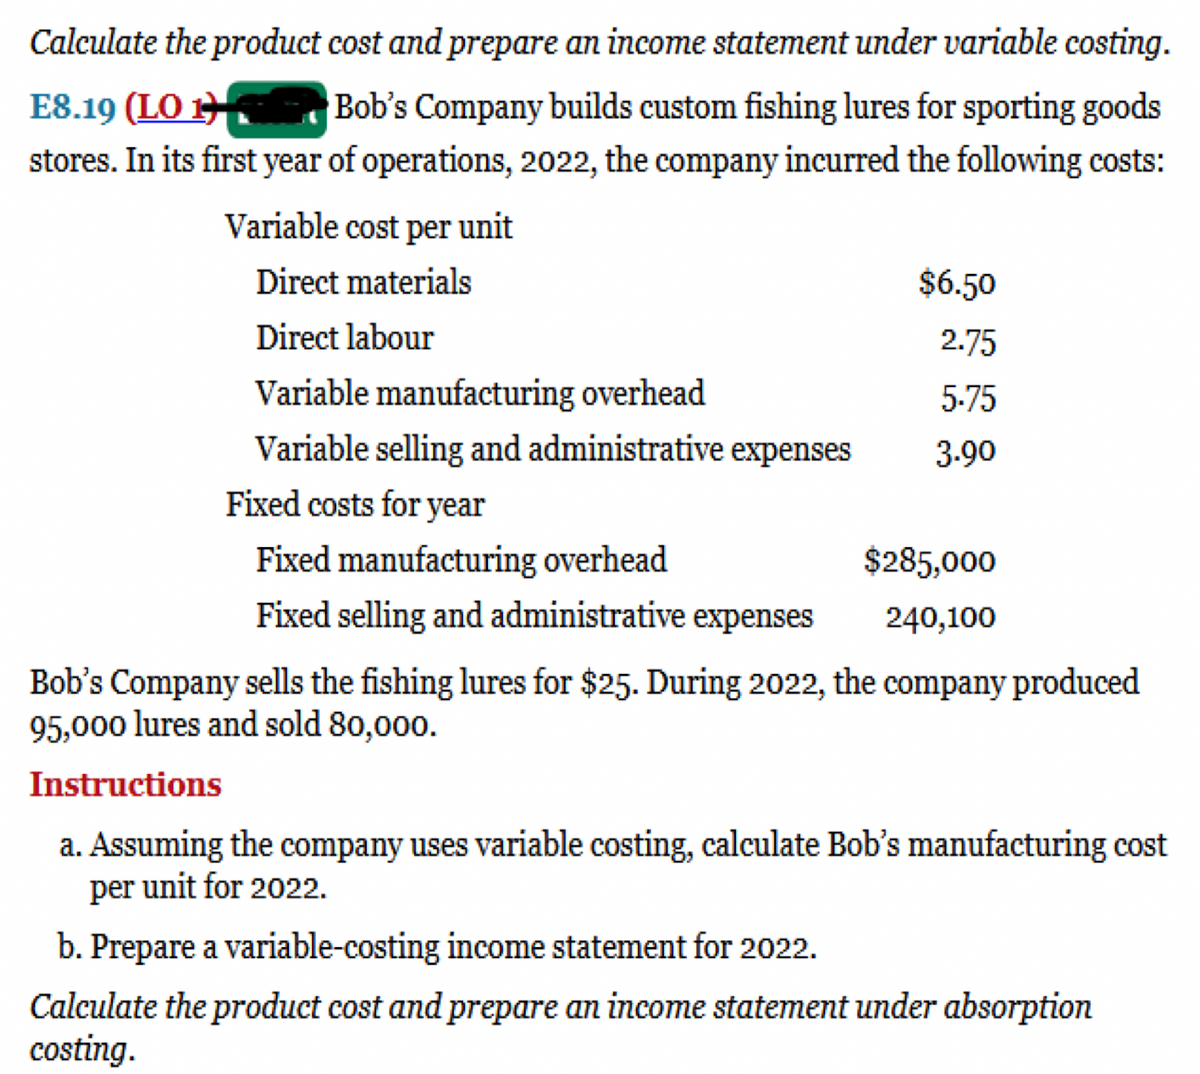 Calculate the product cost and prepare an income statement under variable costing.
Bob's Company builds custom fishing lures for sporting goods
stores. In its first year of operations, 2022, the company incurred the following costs:
E8.19 (LO 1
Variable cost per unit
Direct materials
$6.50
Direct labour
2.75
Variable manufacturing overhead
5.75
Variable selling and administrative expenses
3.90
Fixed costs for year
Fixed manufacturing overhead
$285,000
Fixed selling and administrative expenses
240,100
Bob's Company sells the fishing lures for $25. During 2022, the company produced
95,000 lures and sold 80,000.
Instructions
a. Assuming the company uses variable costing, calculate Bob's manufacturing cost
per unit for 2022.
b. Prepare a variable-costing income statement for 2022.
Calculate the product cost and prepare an income statement under absorption
costing.